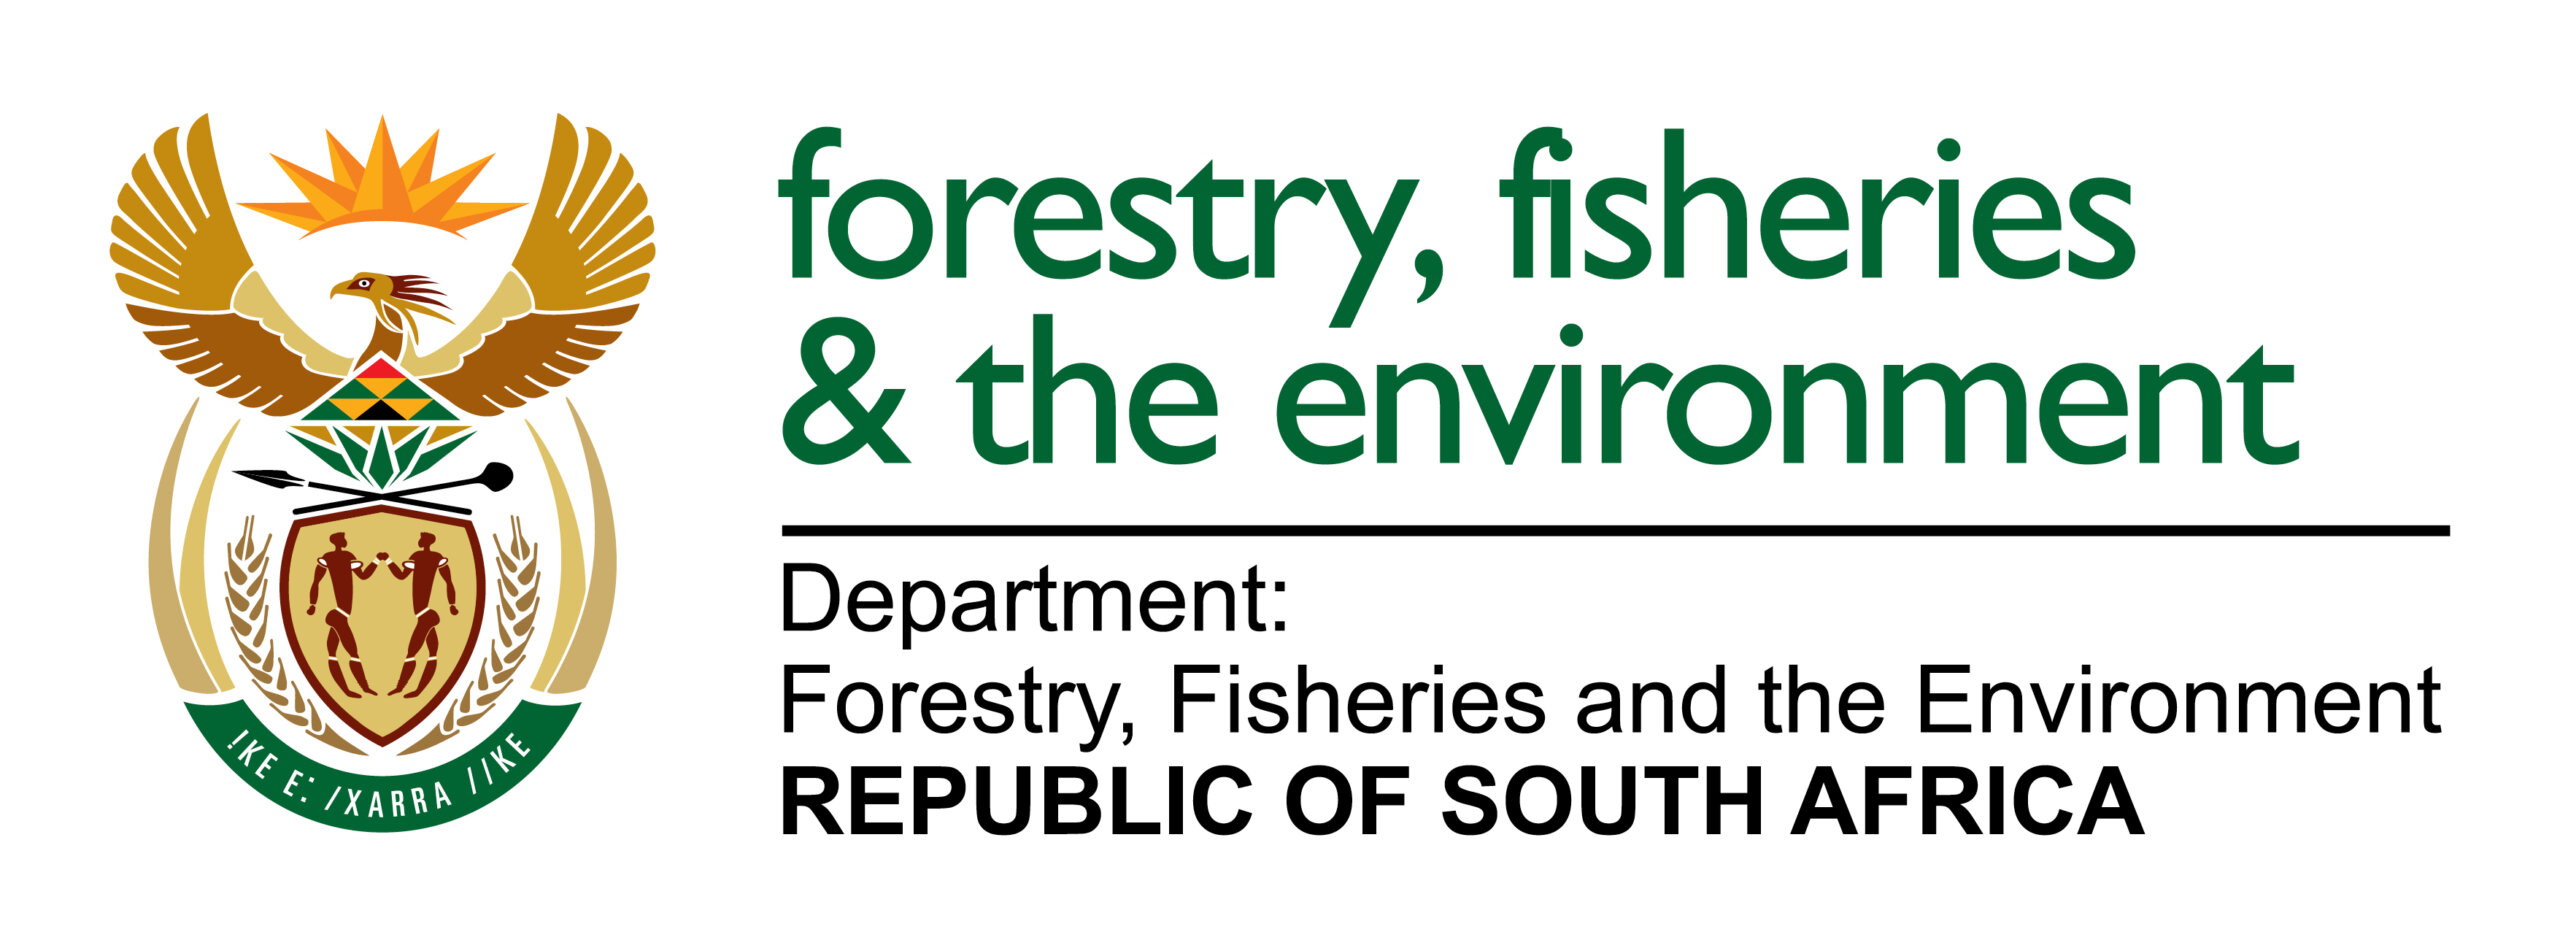 Department of Forestry, Fishers & The Environment